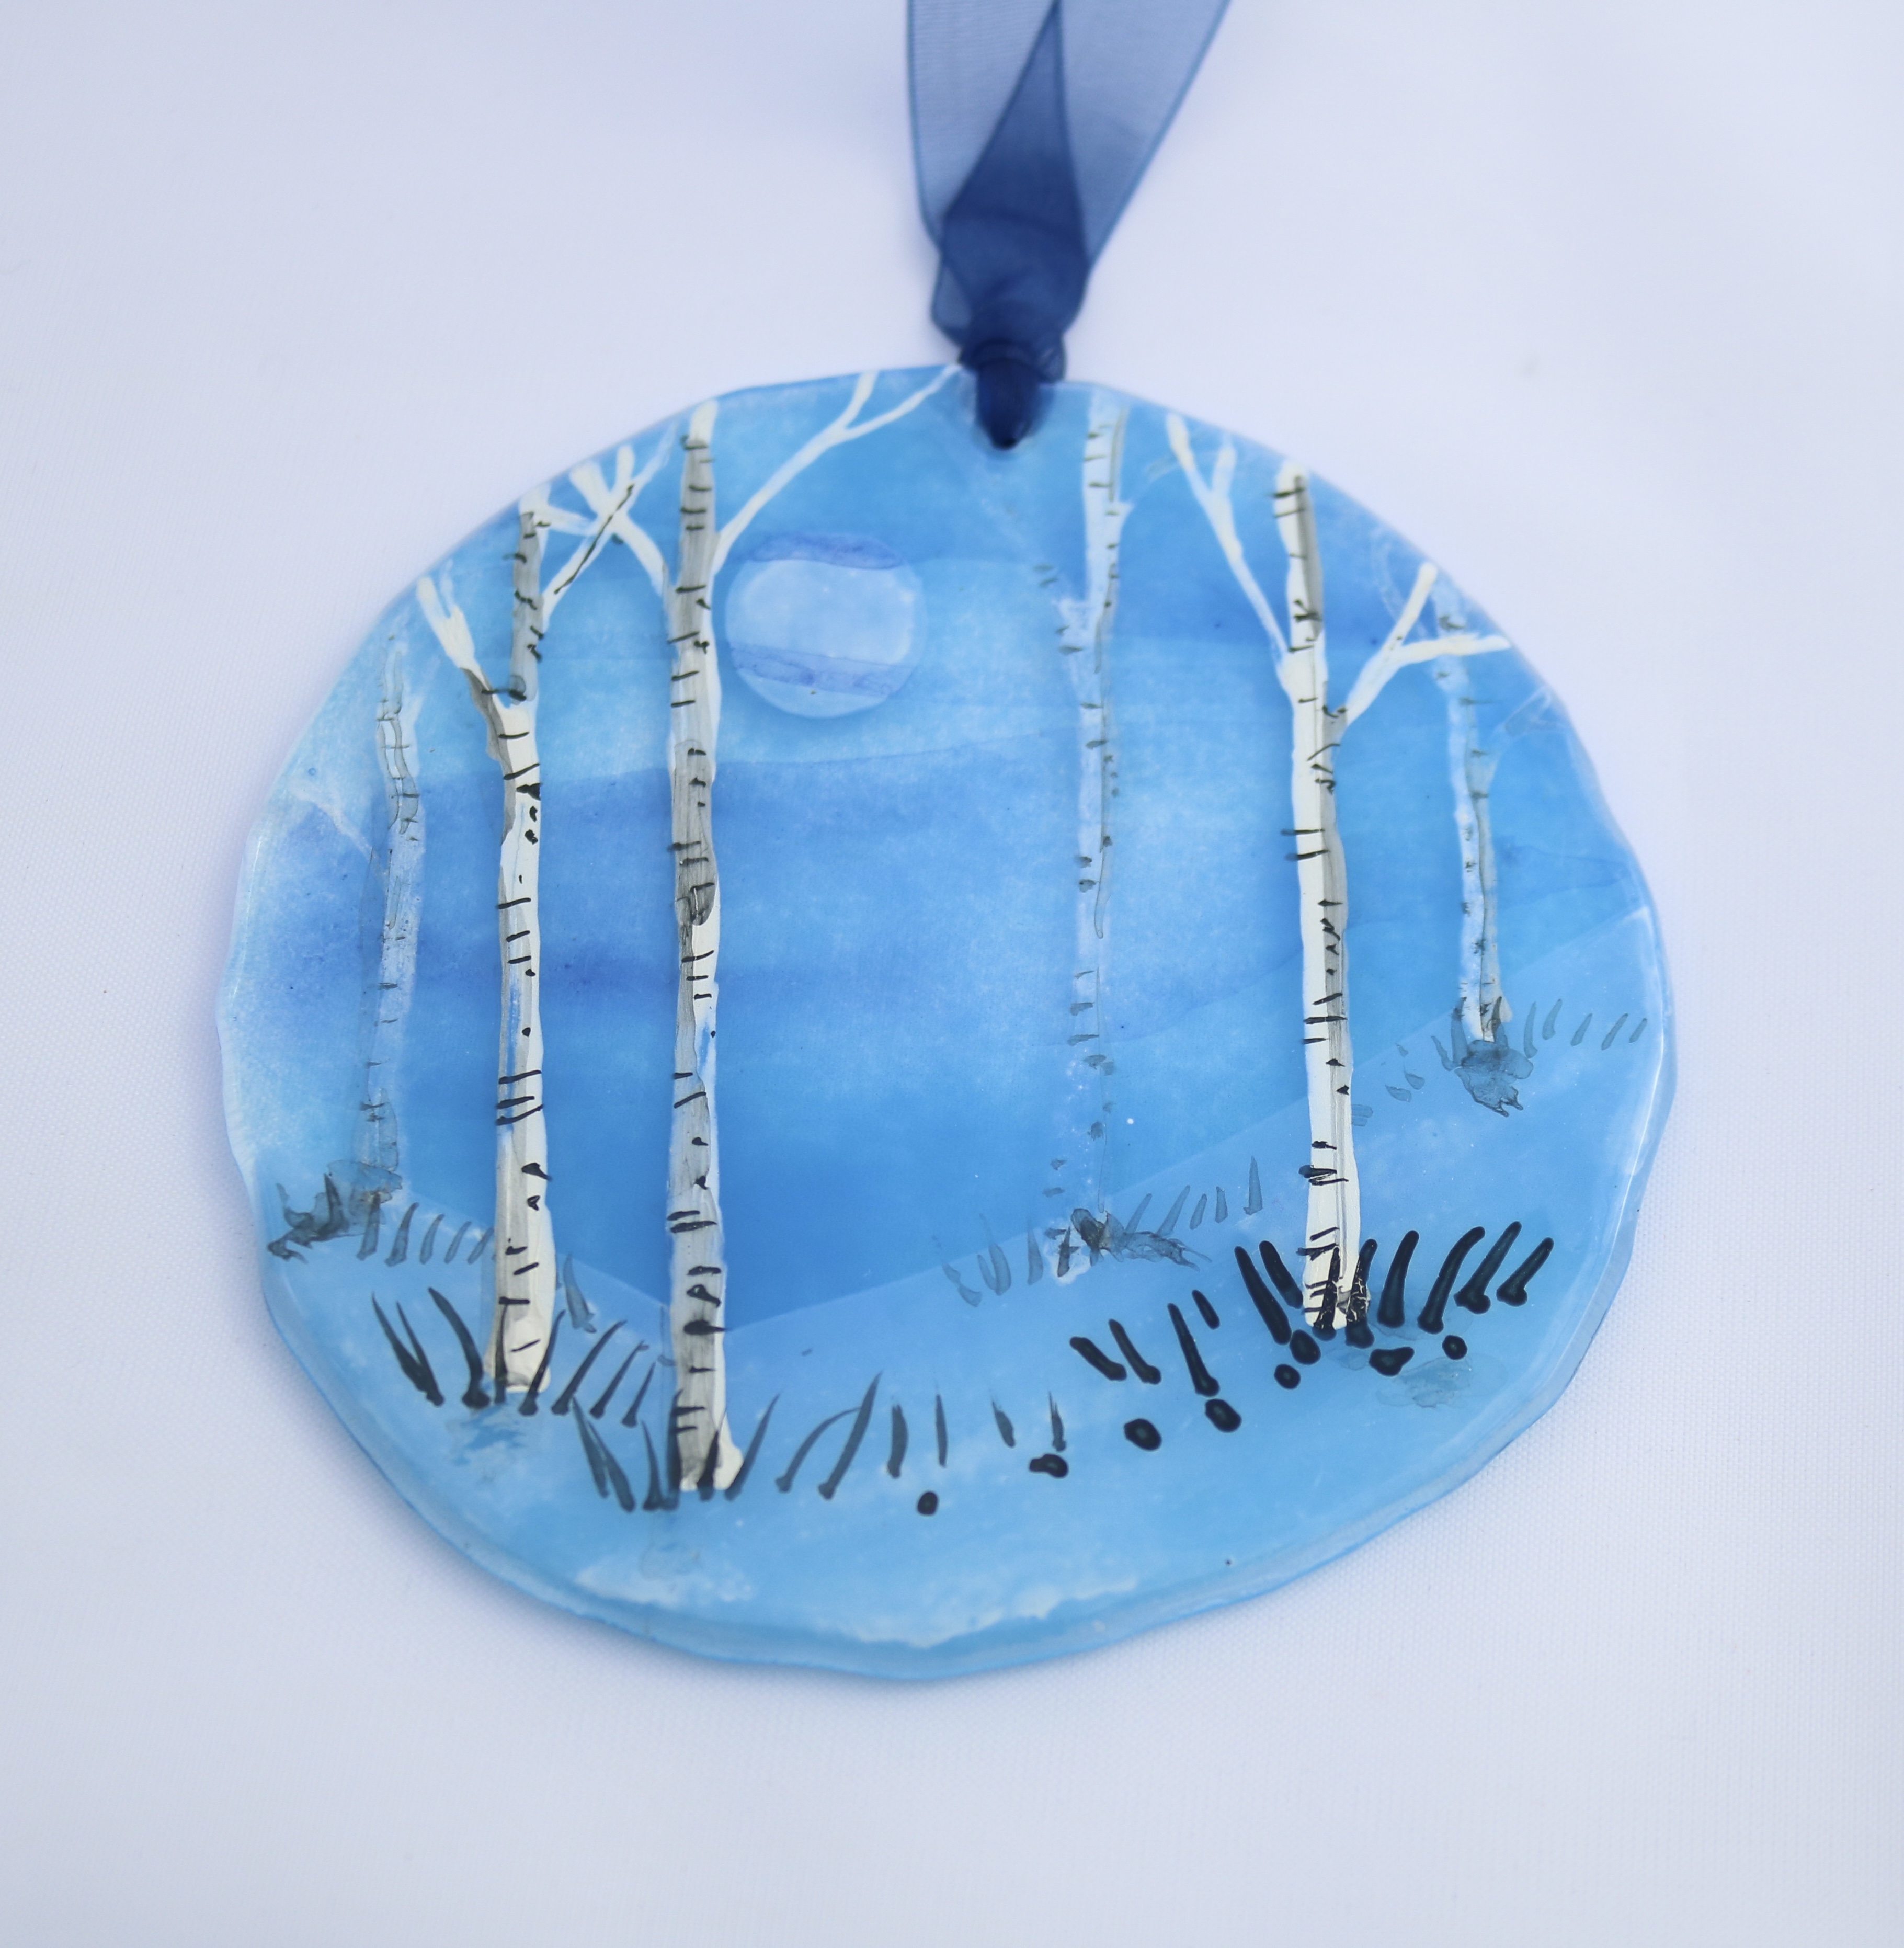 Handpainted birches on blue moonlit fused glass background